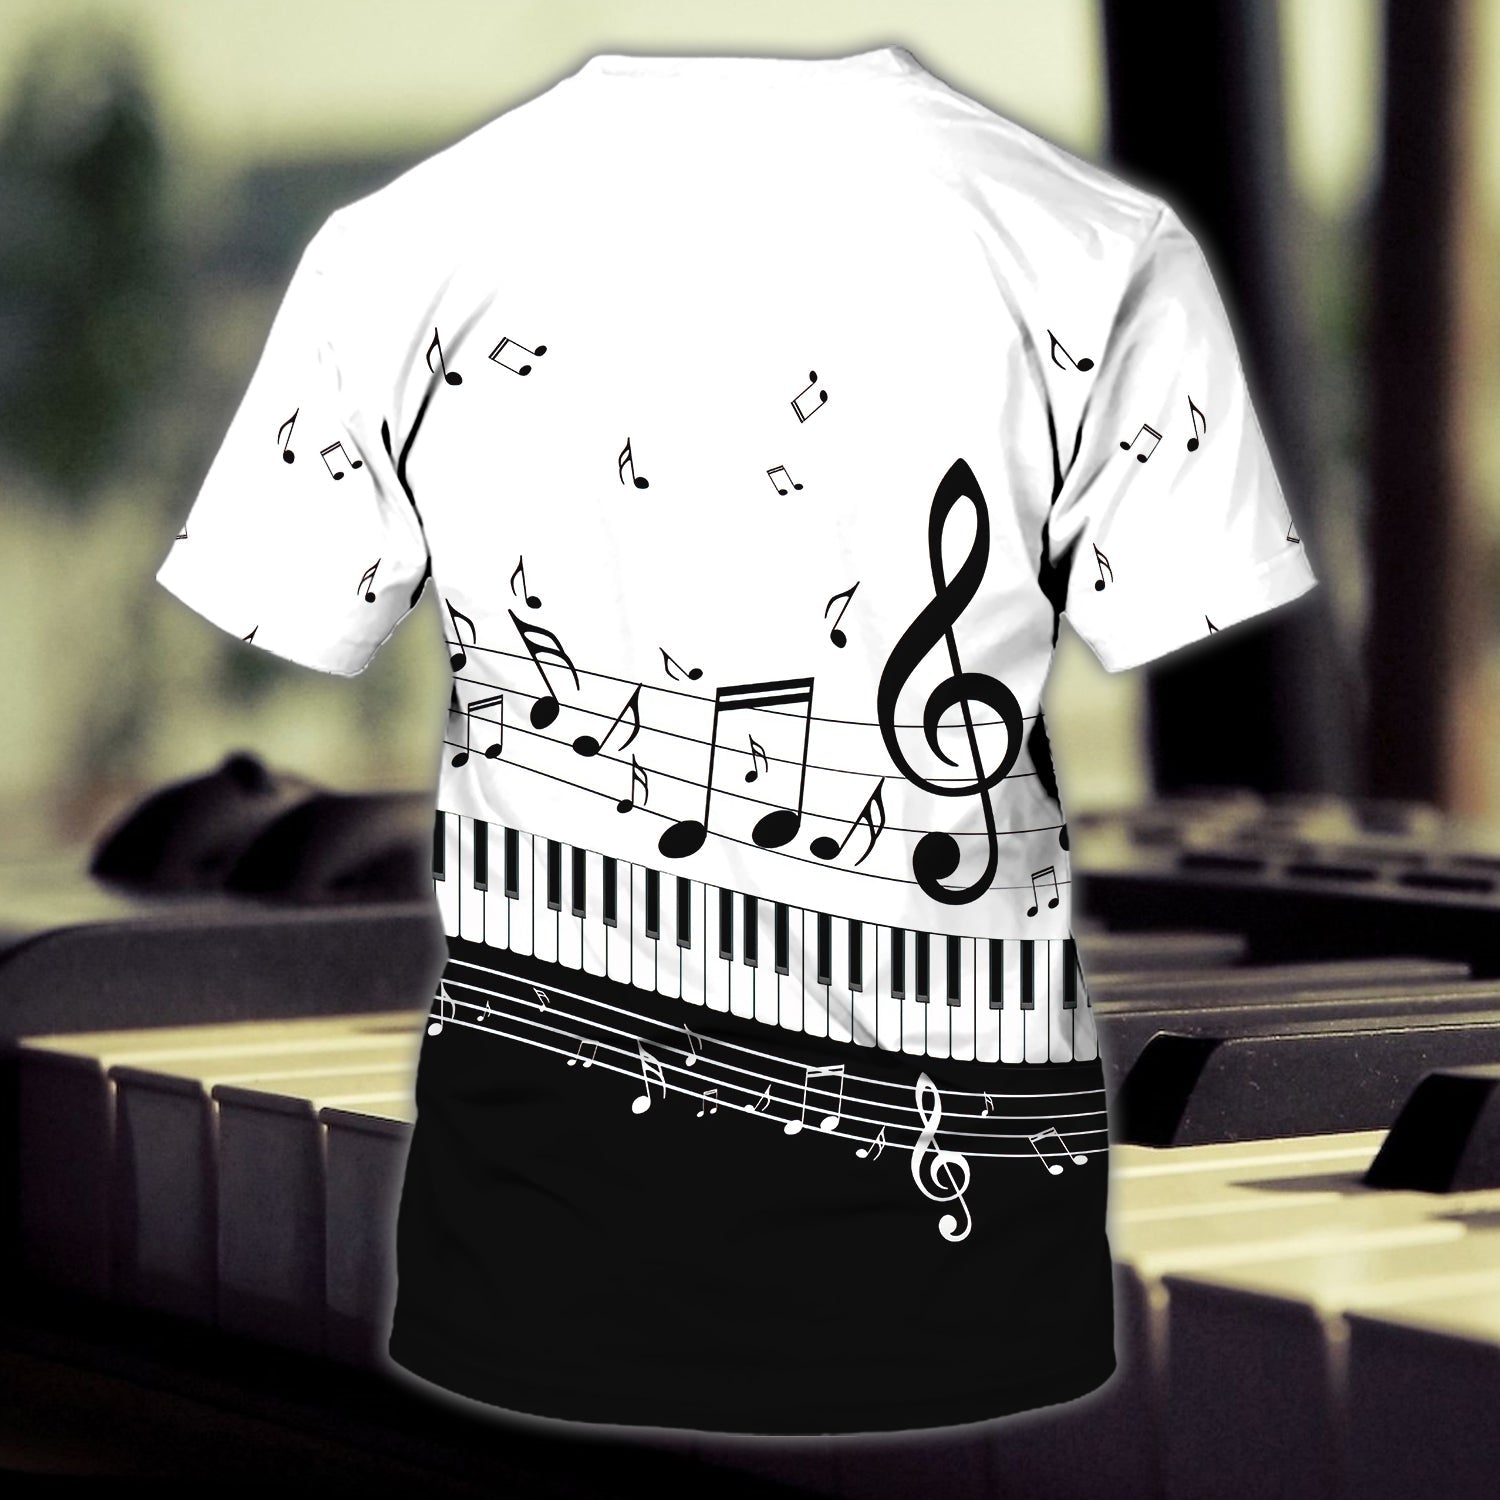 Personalized White 3D Shirt With Piano/ Sublimation Shirt For Piano Lover